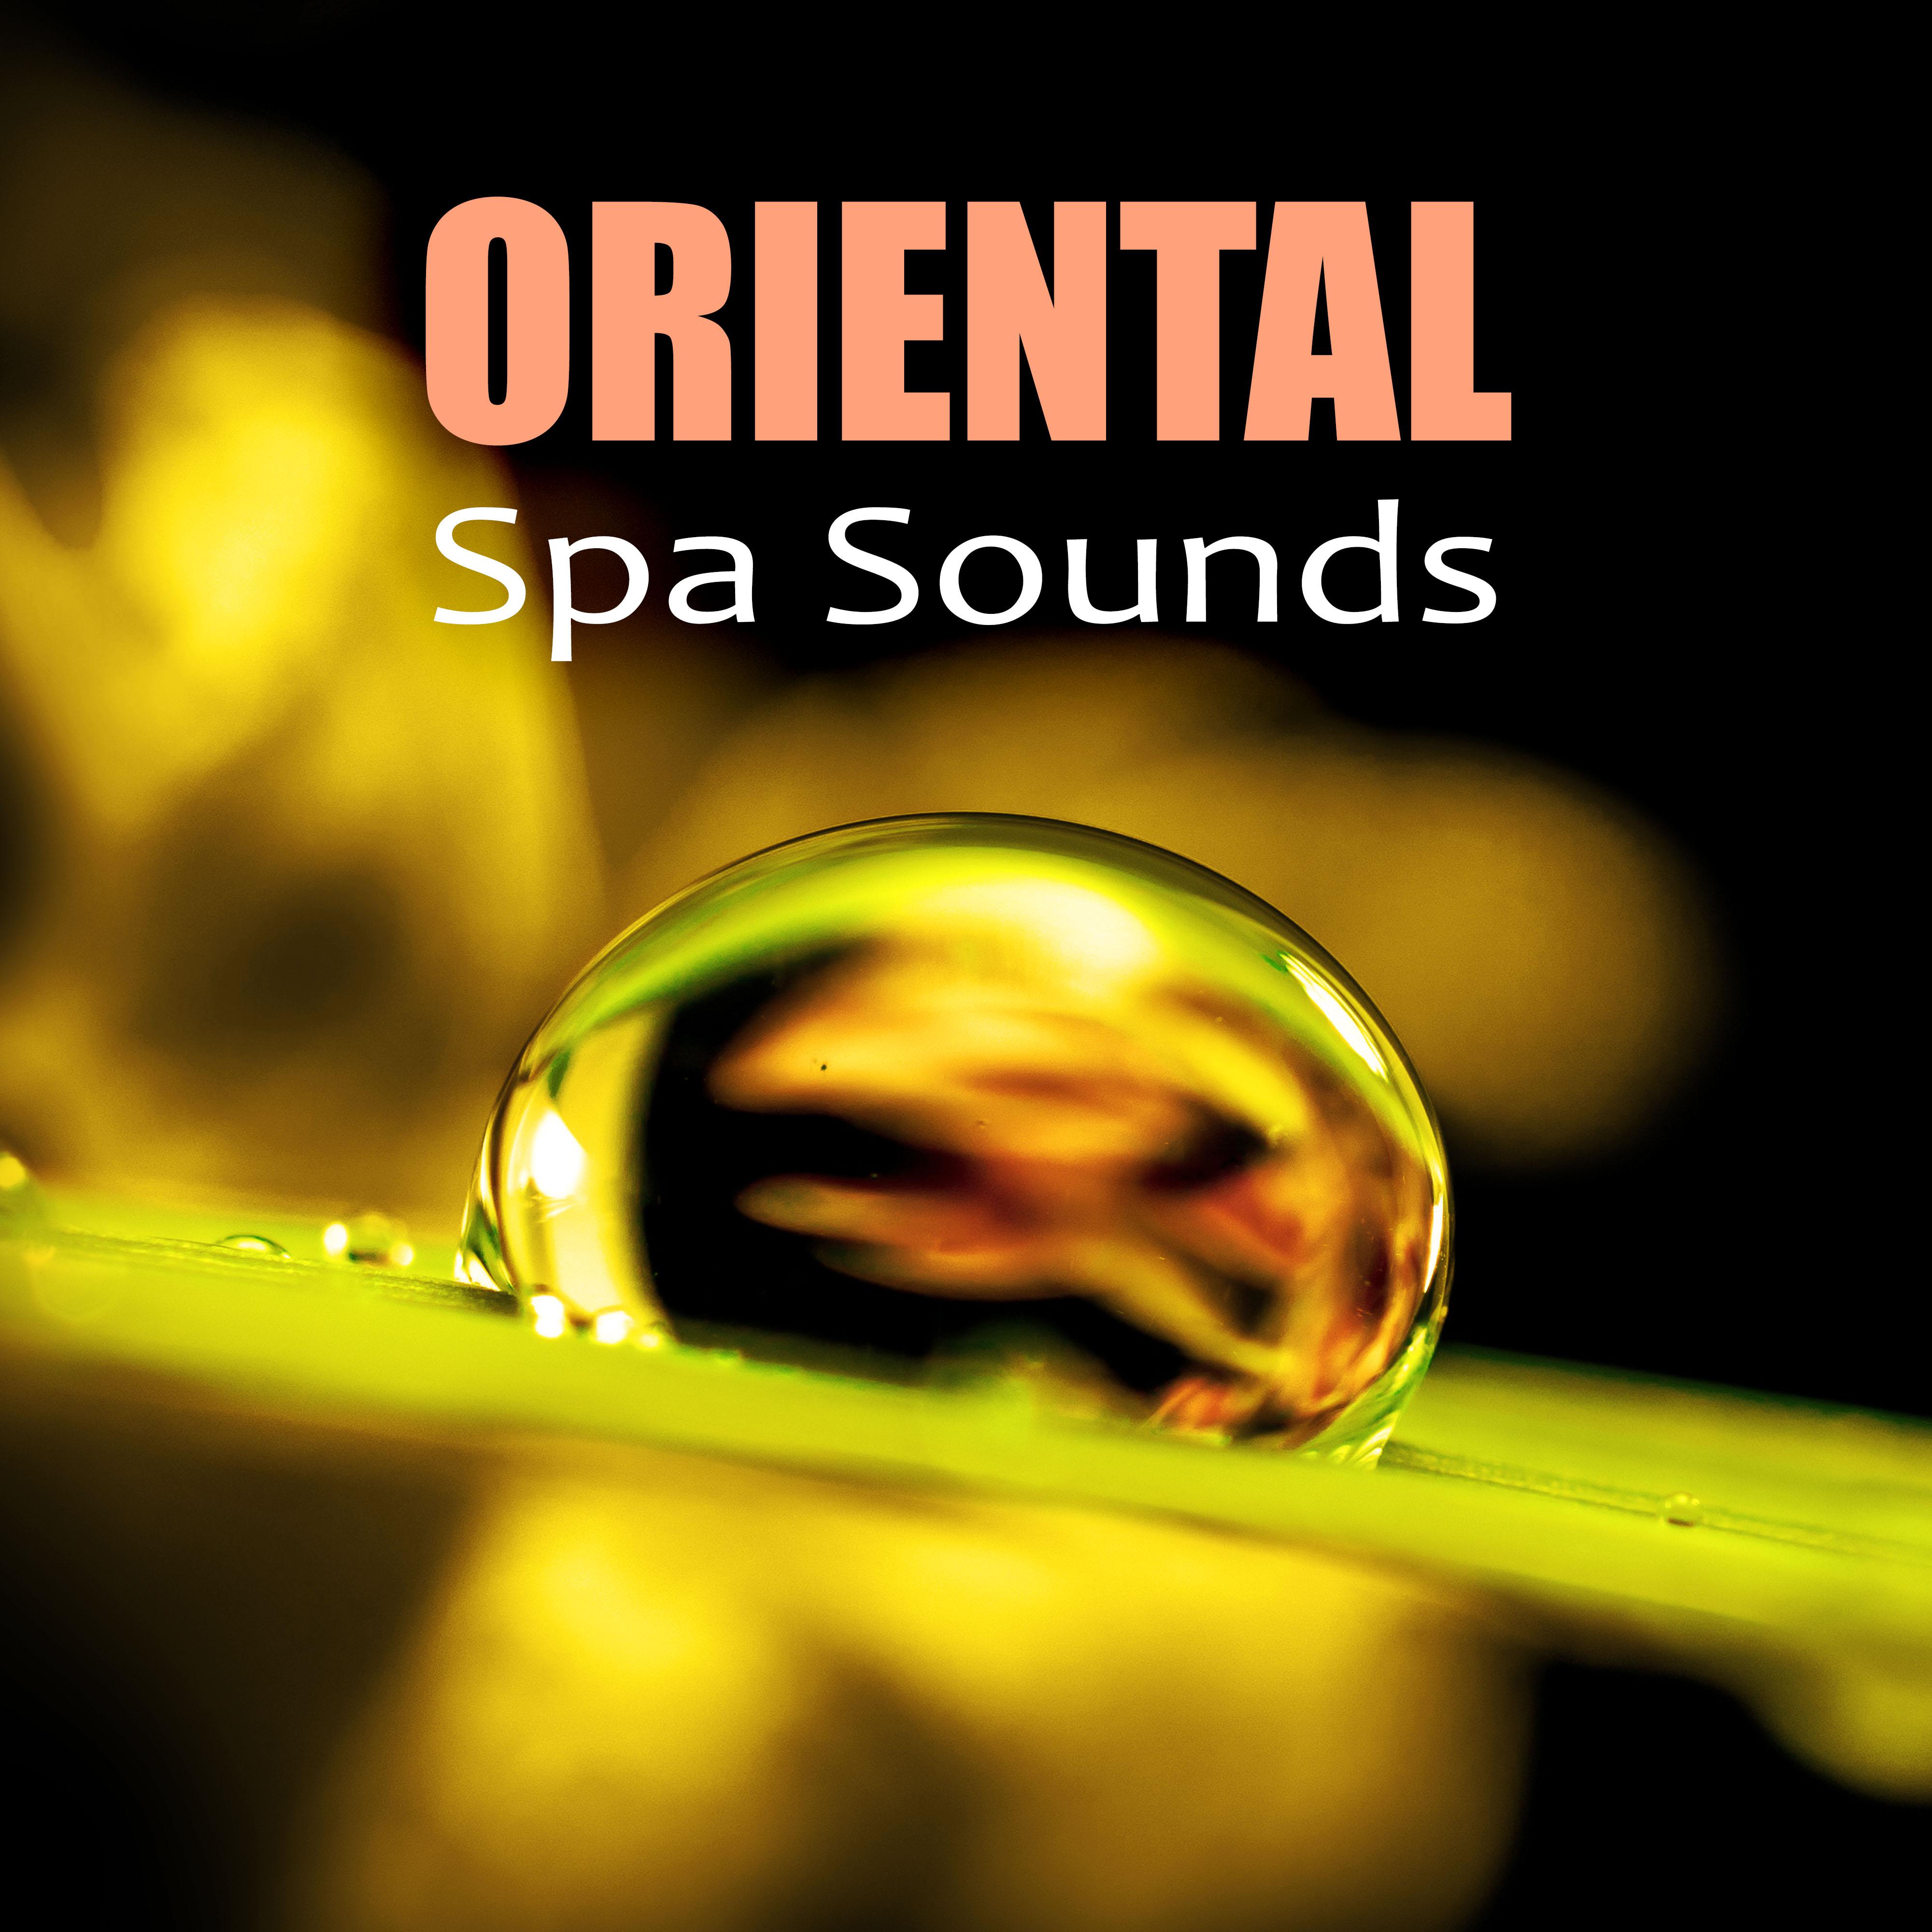 Oriental Spa Sounds - Sound Therapy, Music for Relaxation, Calm Music for Meditation, Sounds of Nature, Relaxing Spa Background Music, Music for Massage